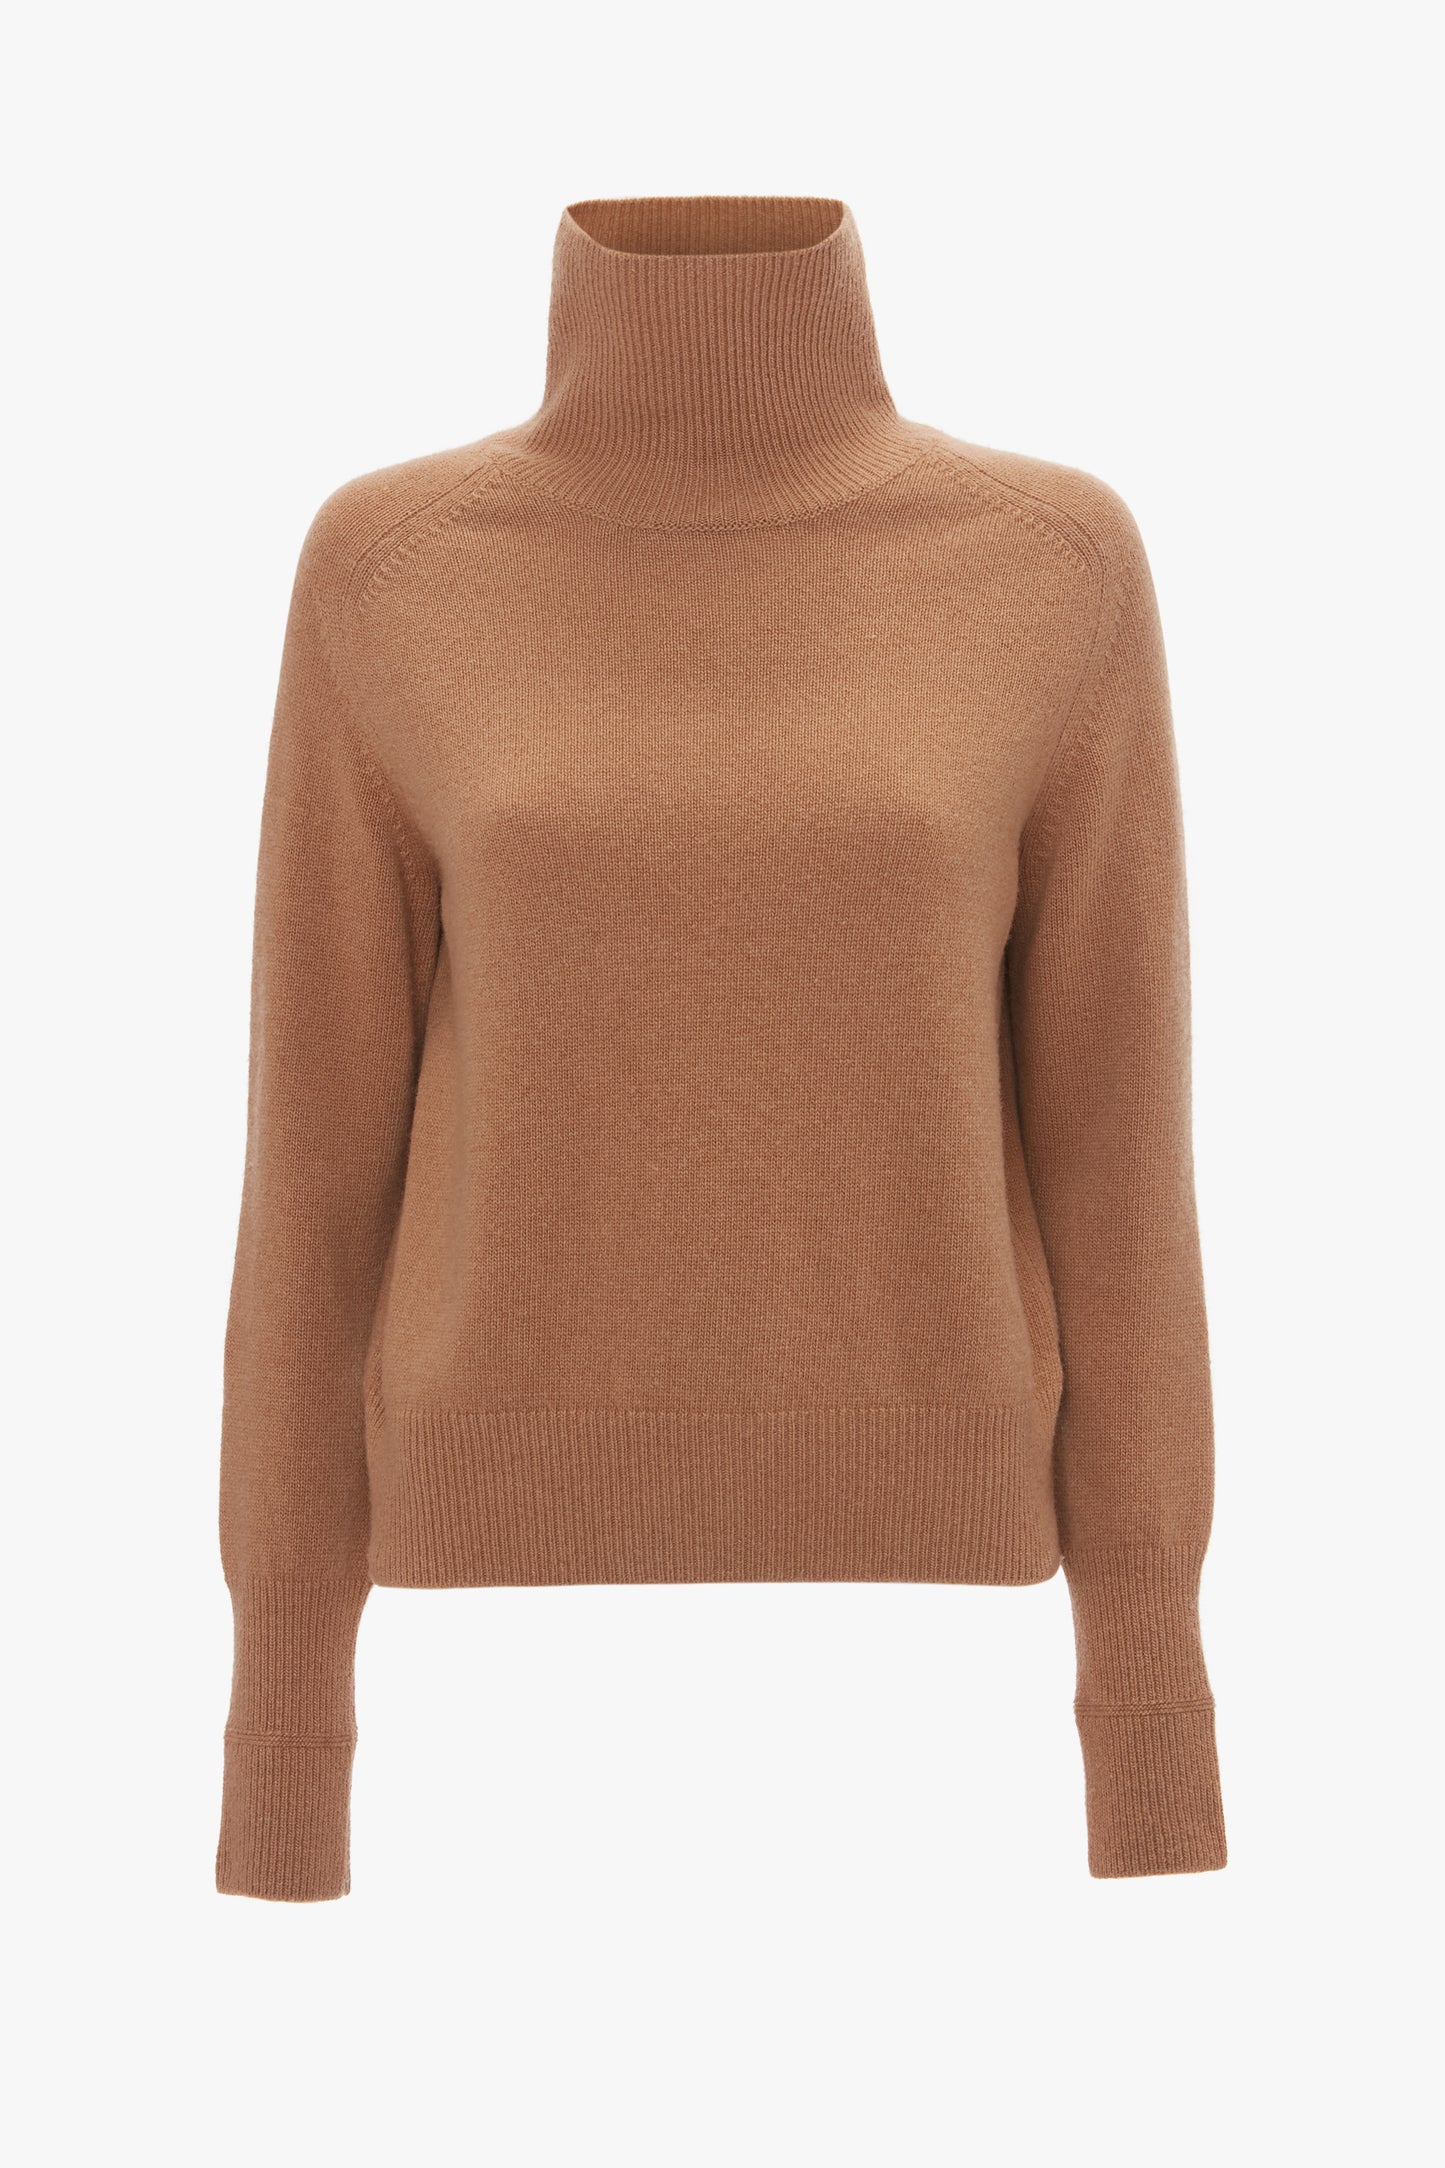 A tobacco-colored lambswool polo neck jumper with long sleeves and ribbed cuffs, isolated on a white background. Brand Name: Victoria Beckham